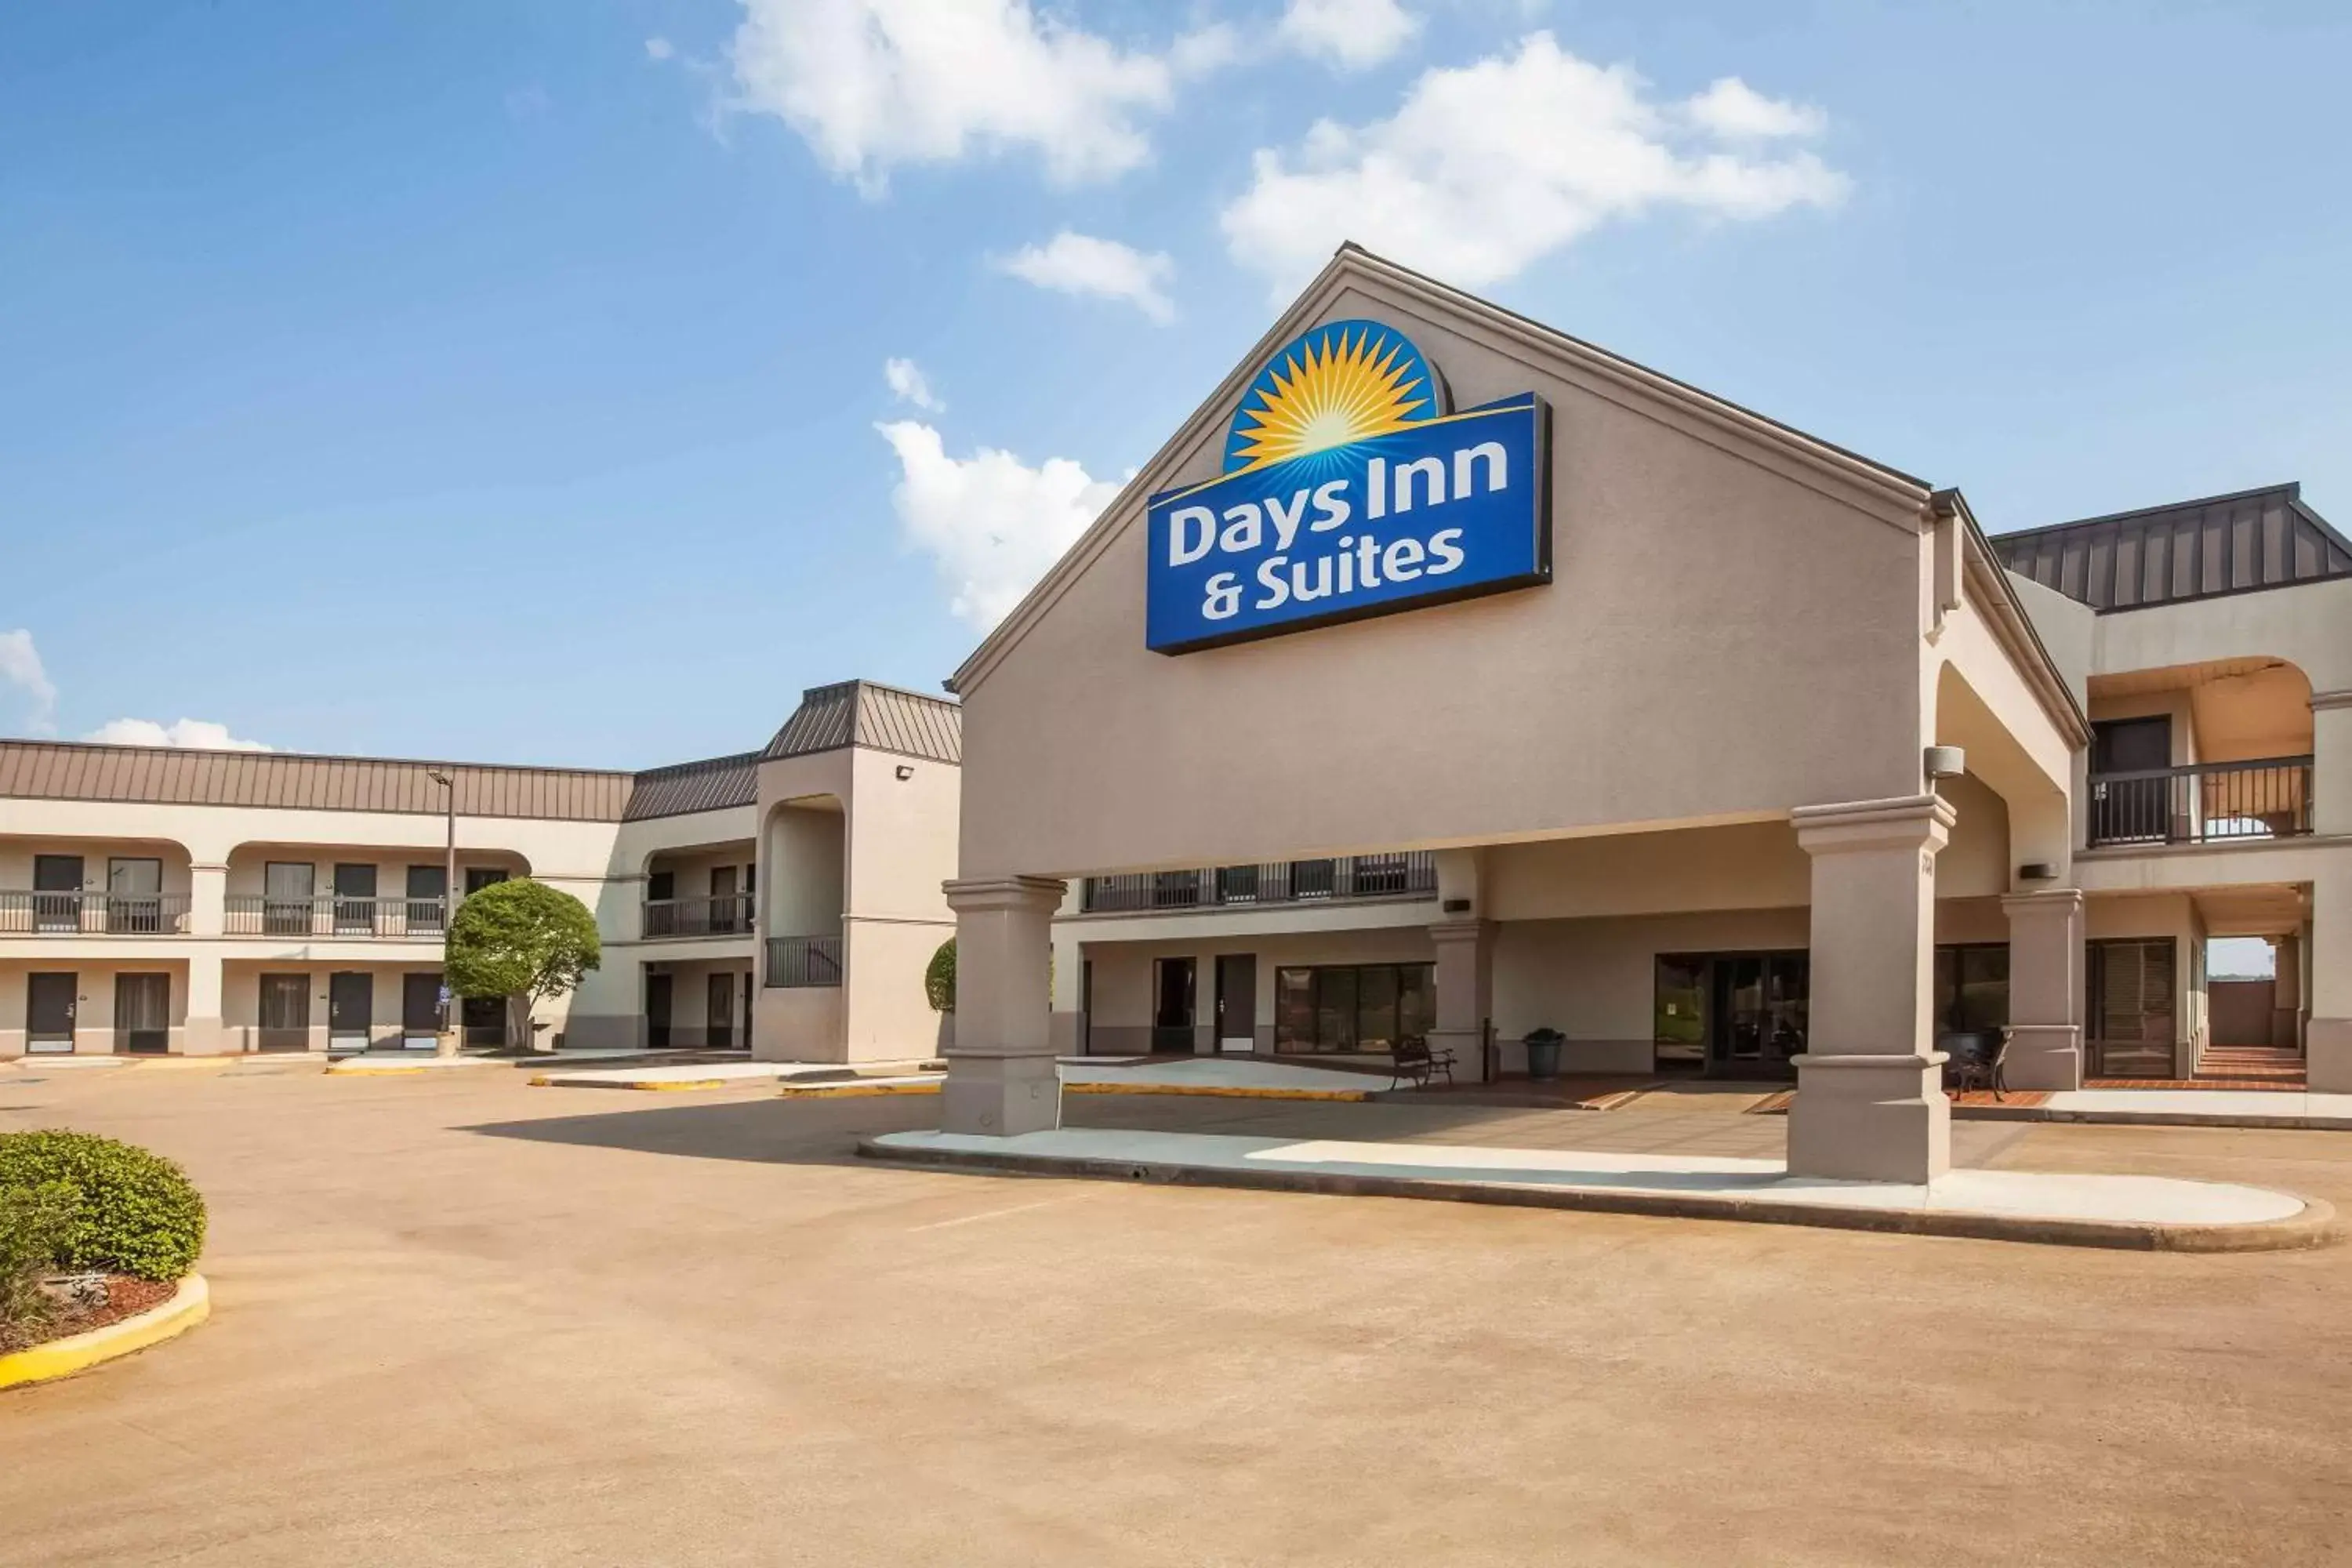 Property building in Days Inn & Suites by Wyndham Tyler